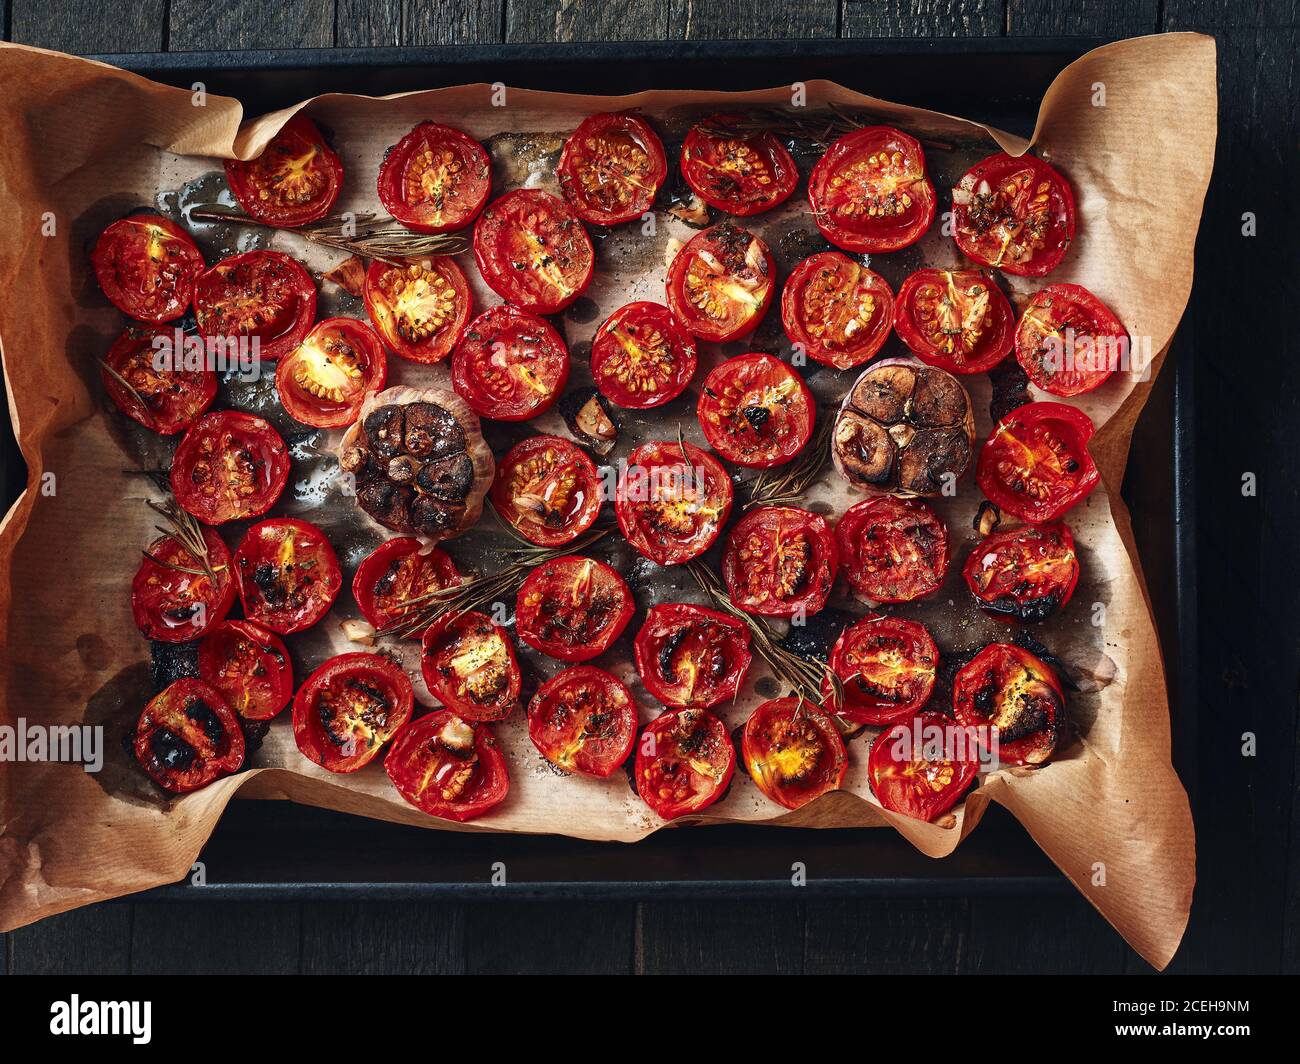 Oven roasted cherry tomatoes on an oven tray. Overhead view. Stock Photo